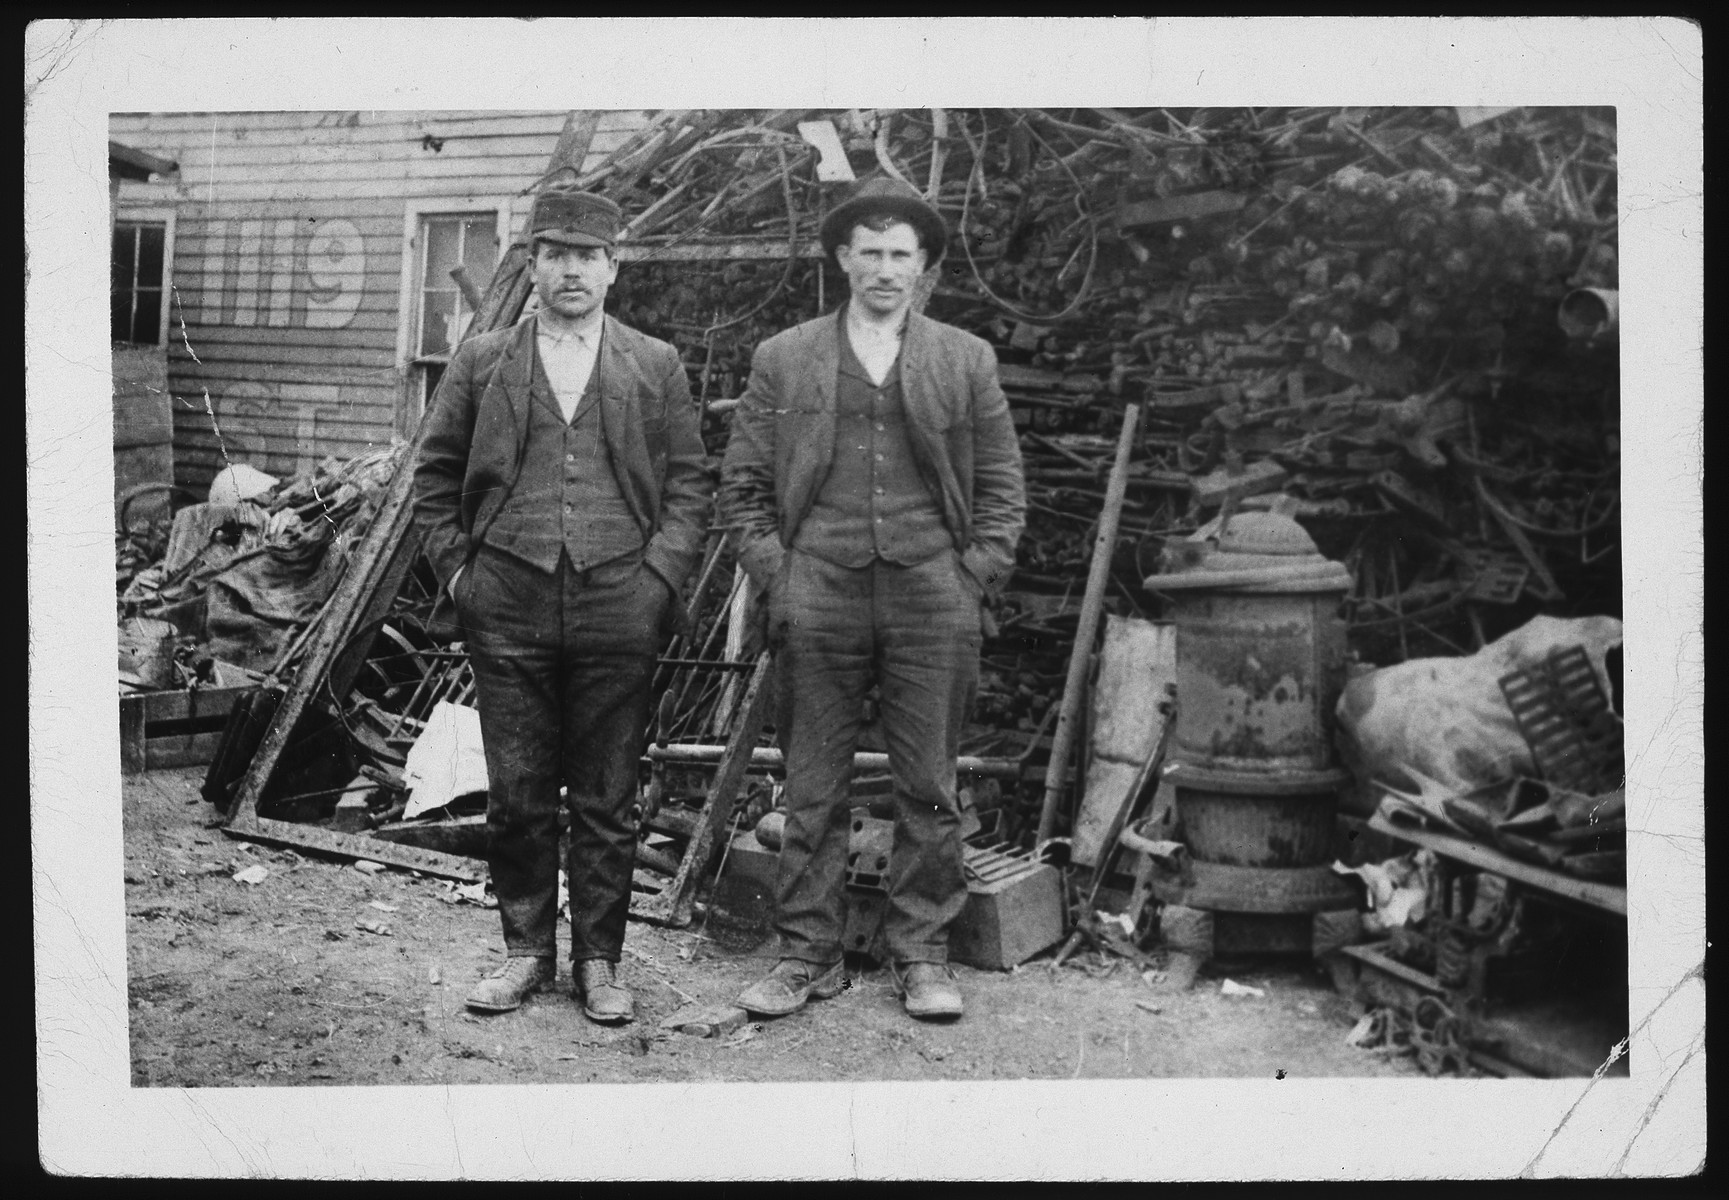 Morris (right) and Yitzhak Asner stand in front of a pile of scrap metal.